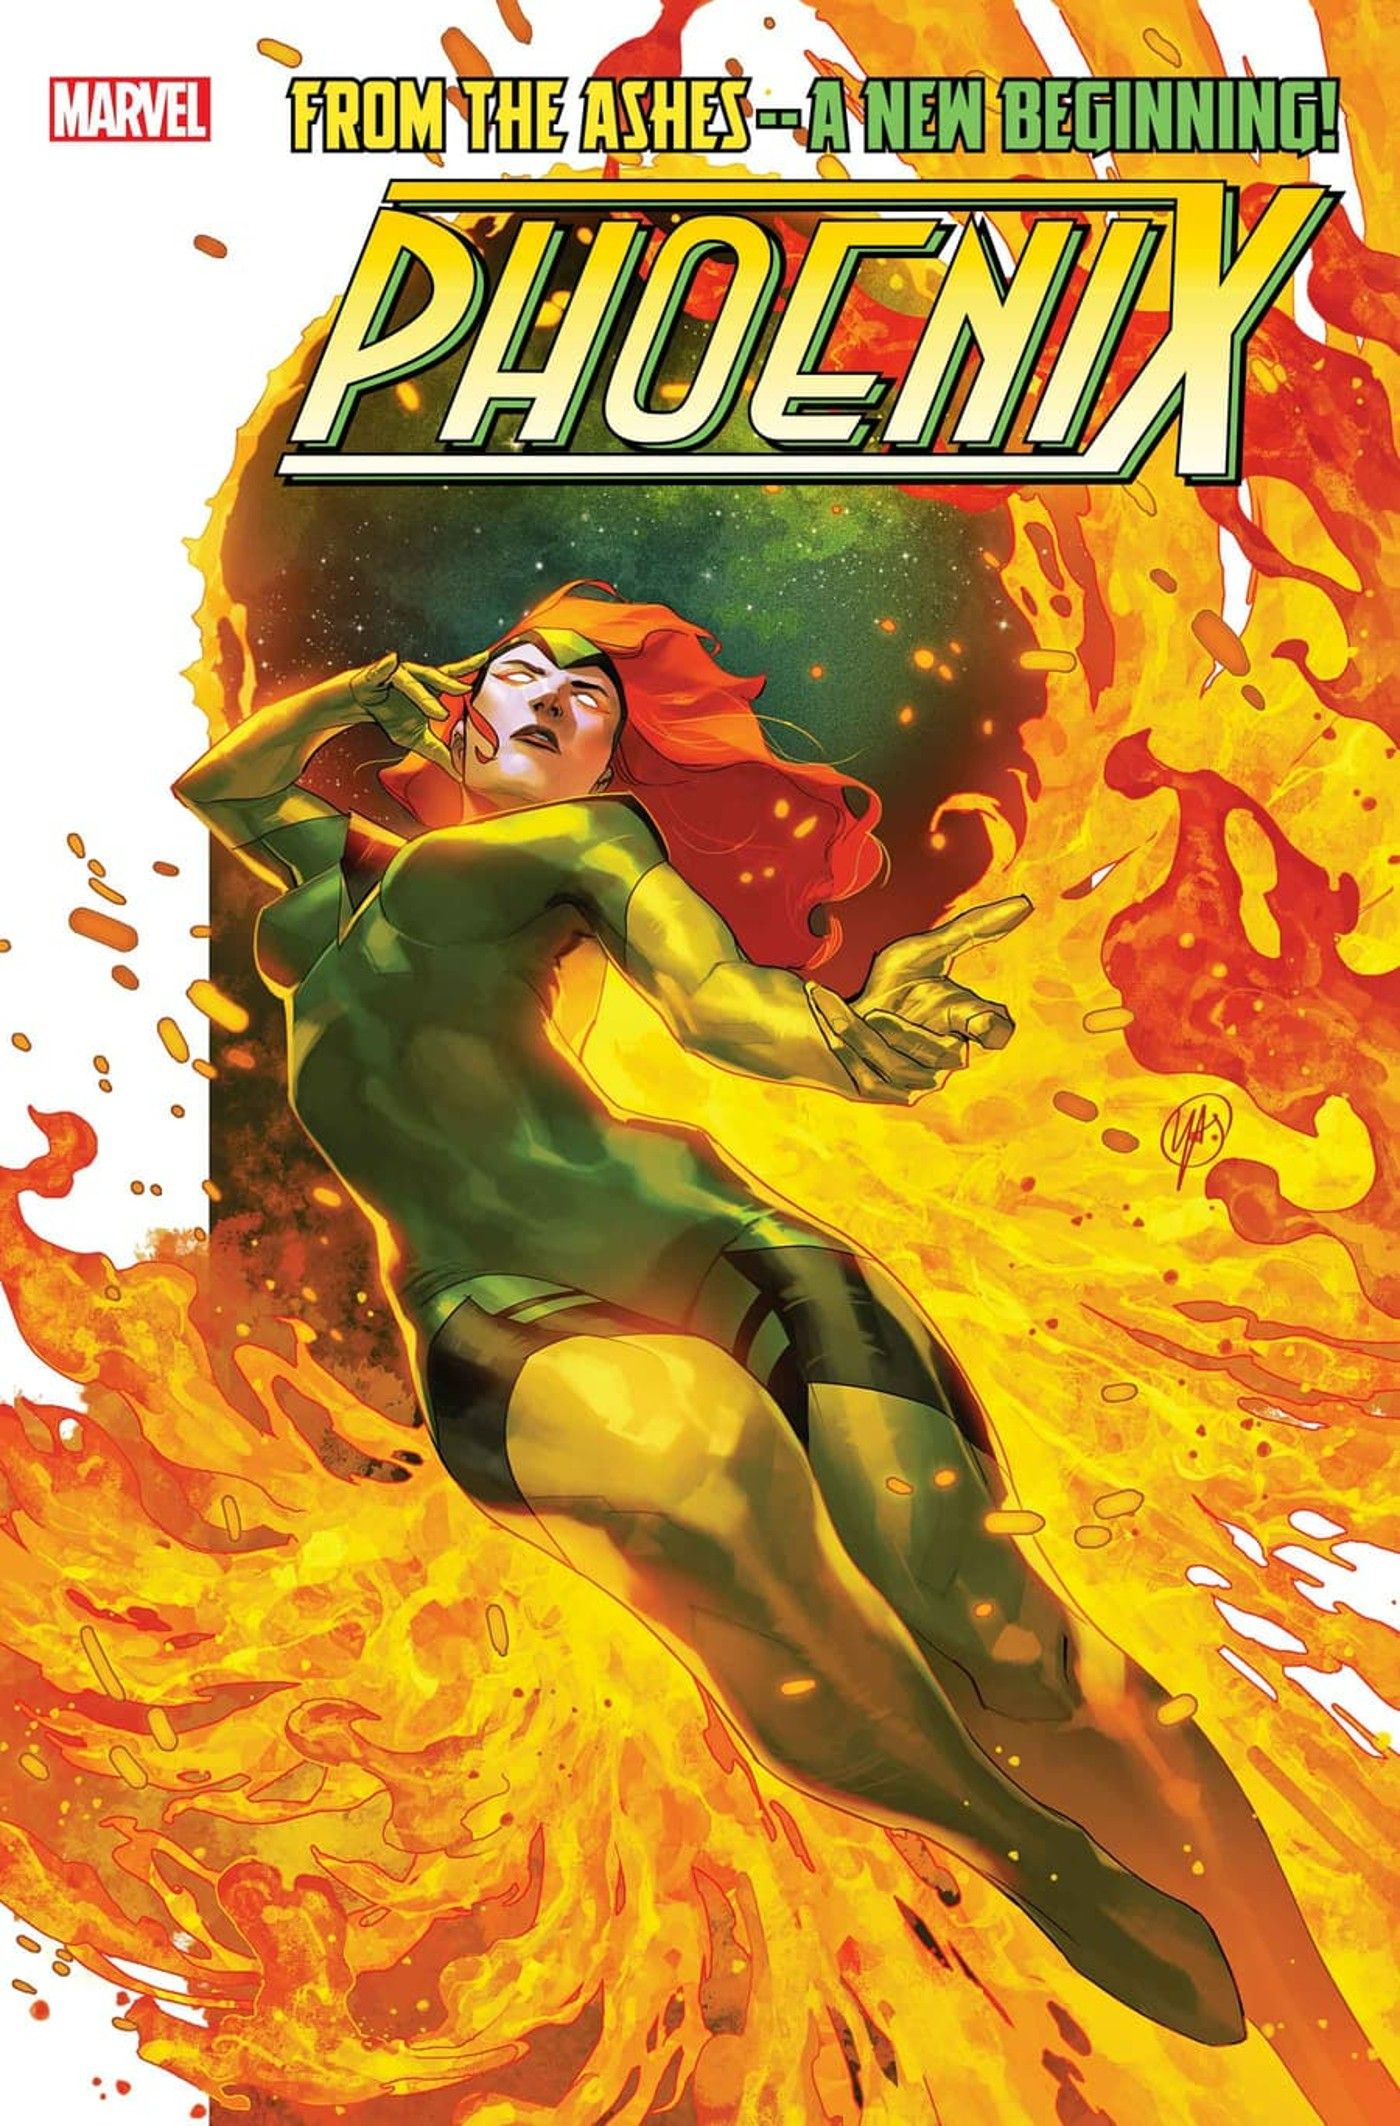 Phoenix #1 main cover by Yasmin Putri, Jean with phoenix wings made of fire.